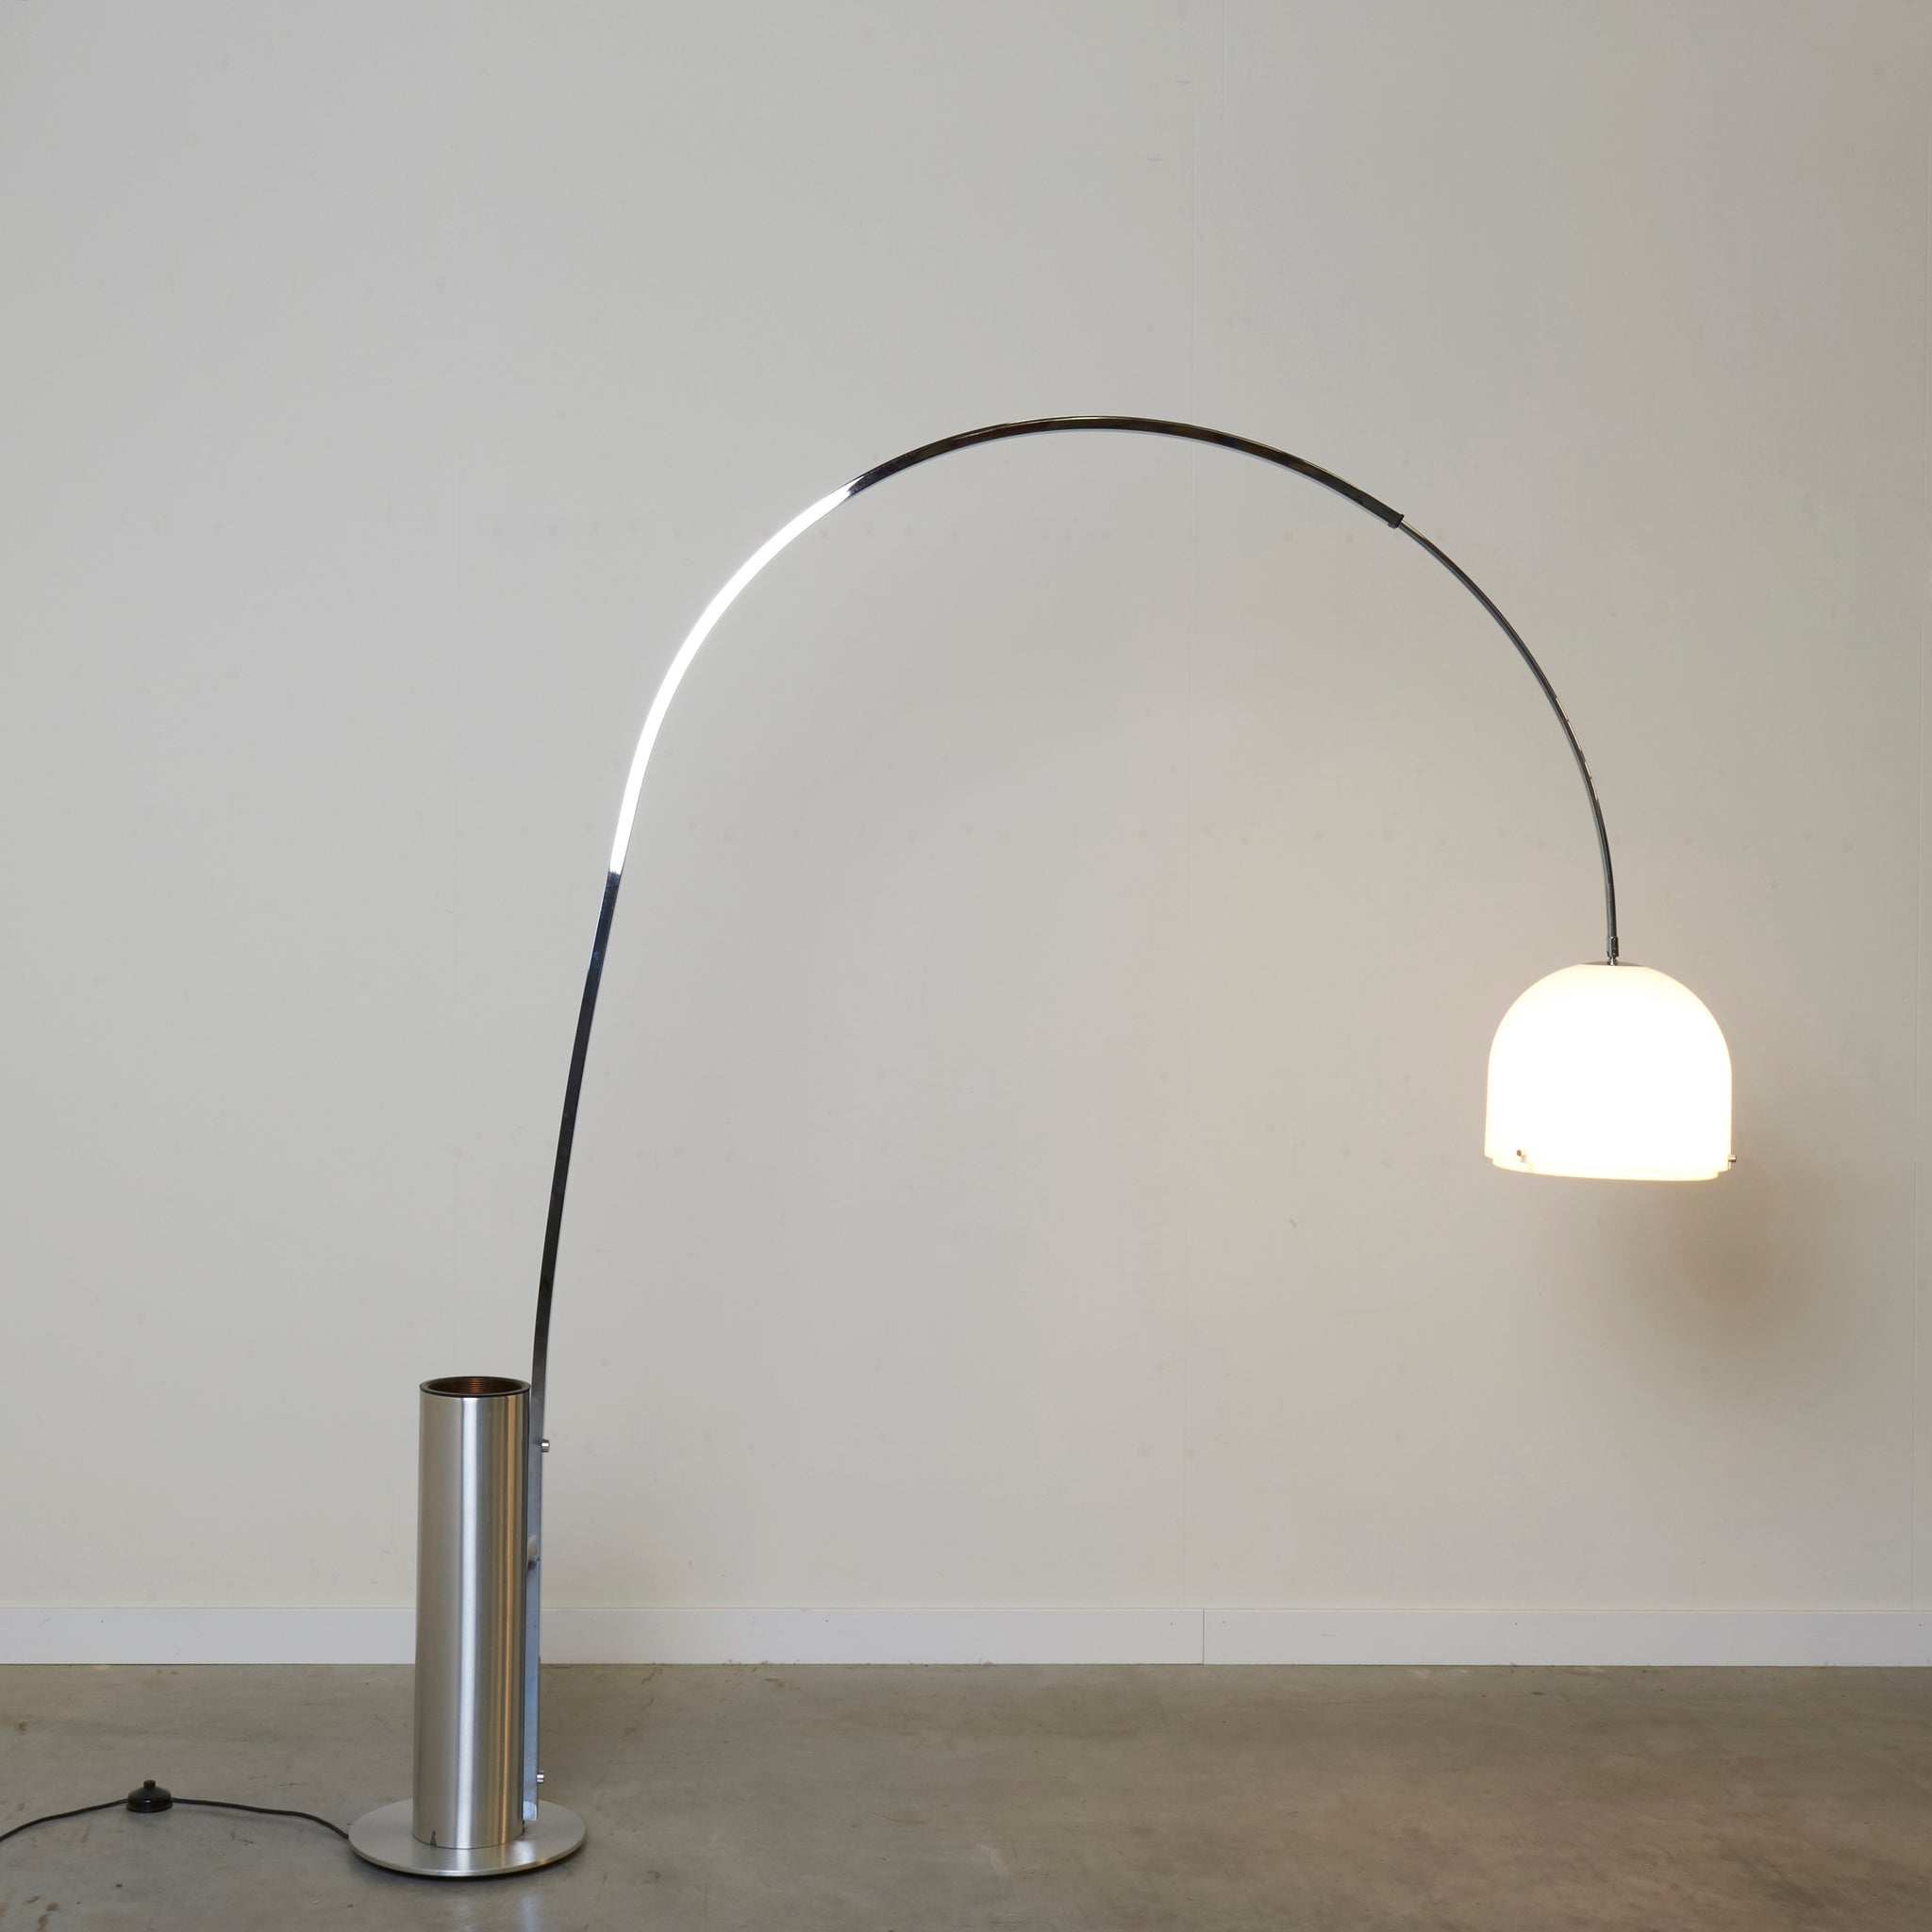 Vintage arc lamp by Wila, 1970s